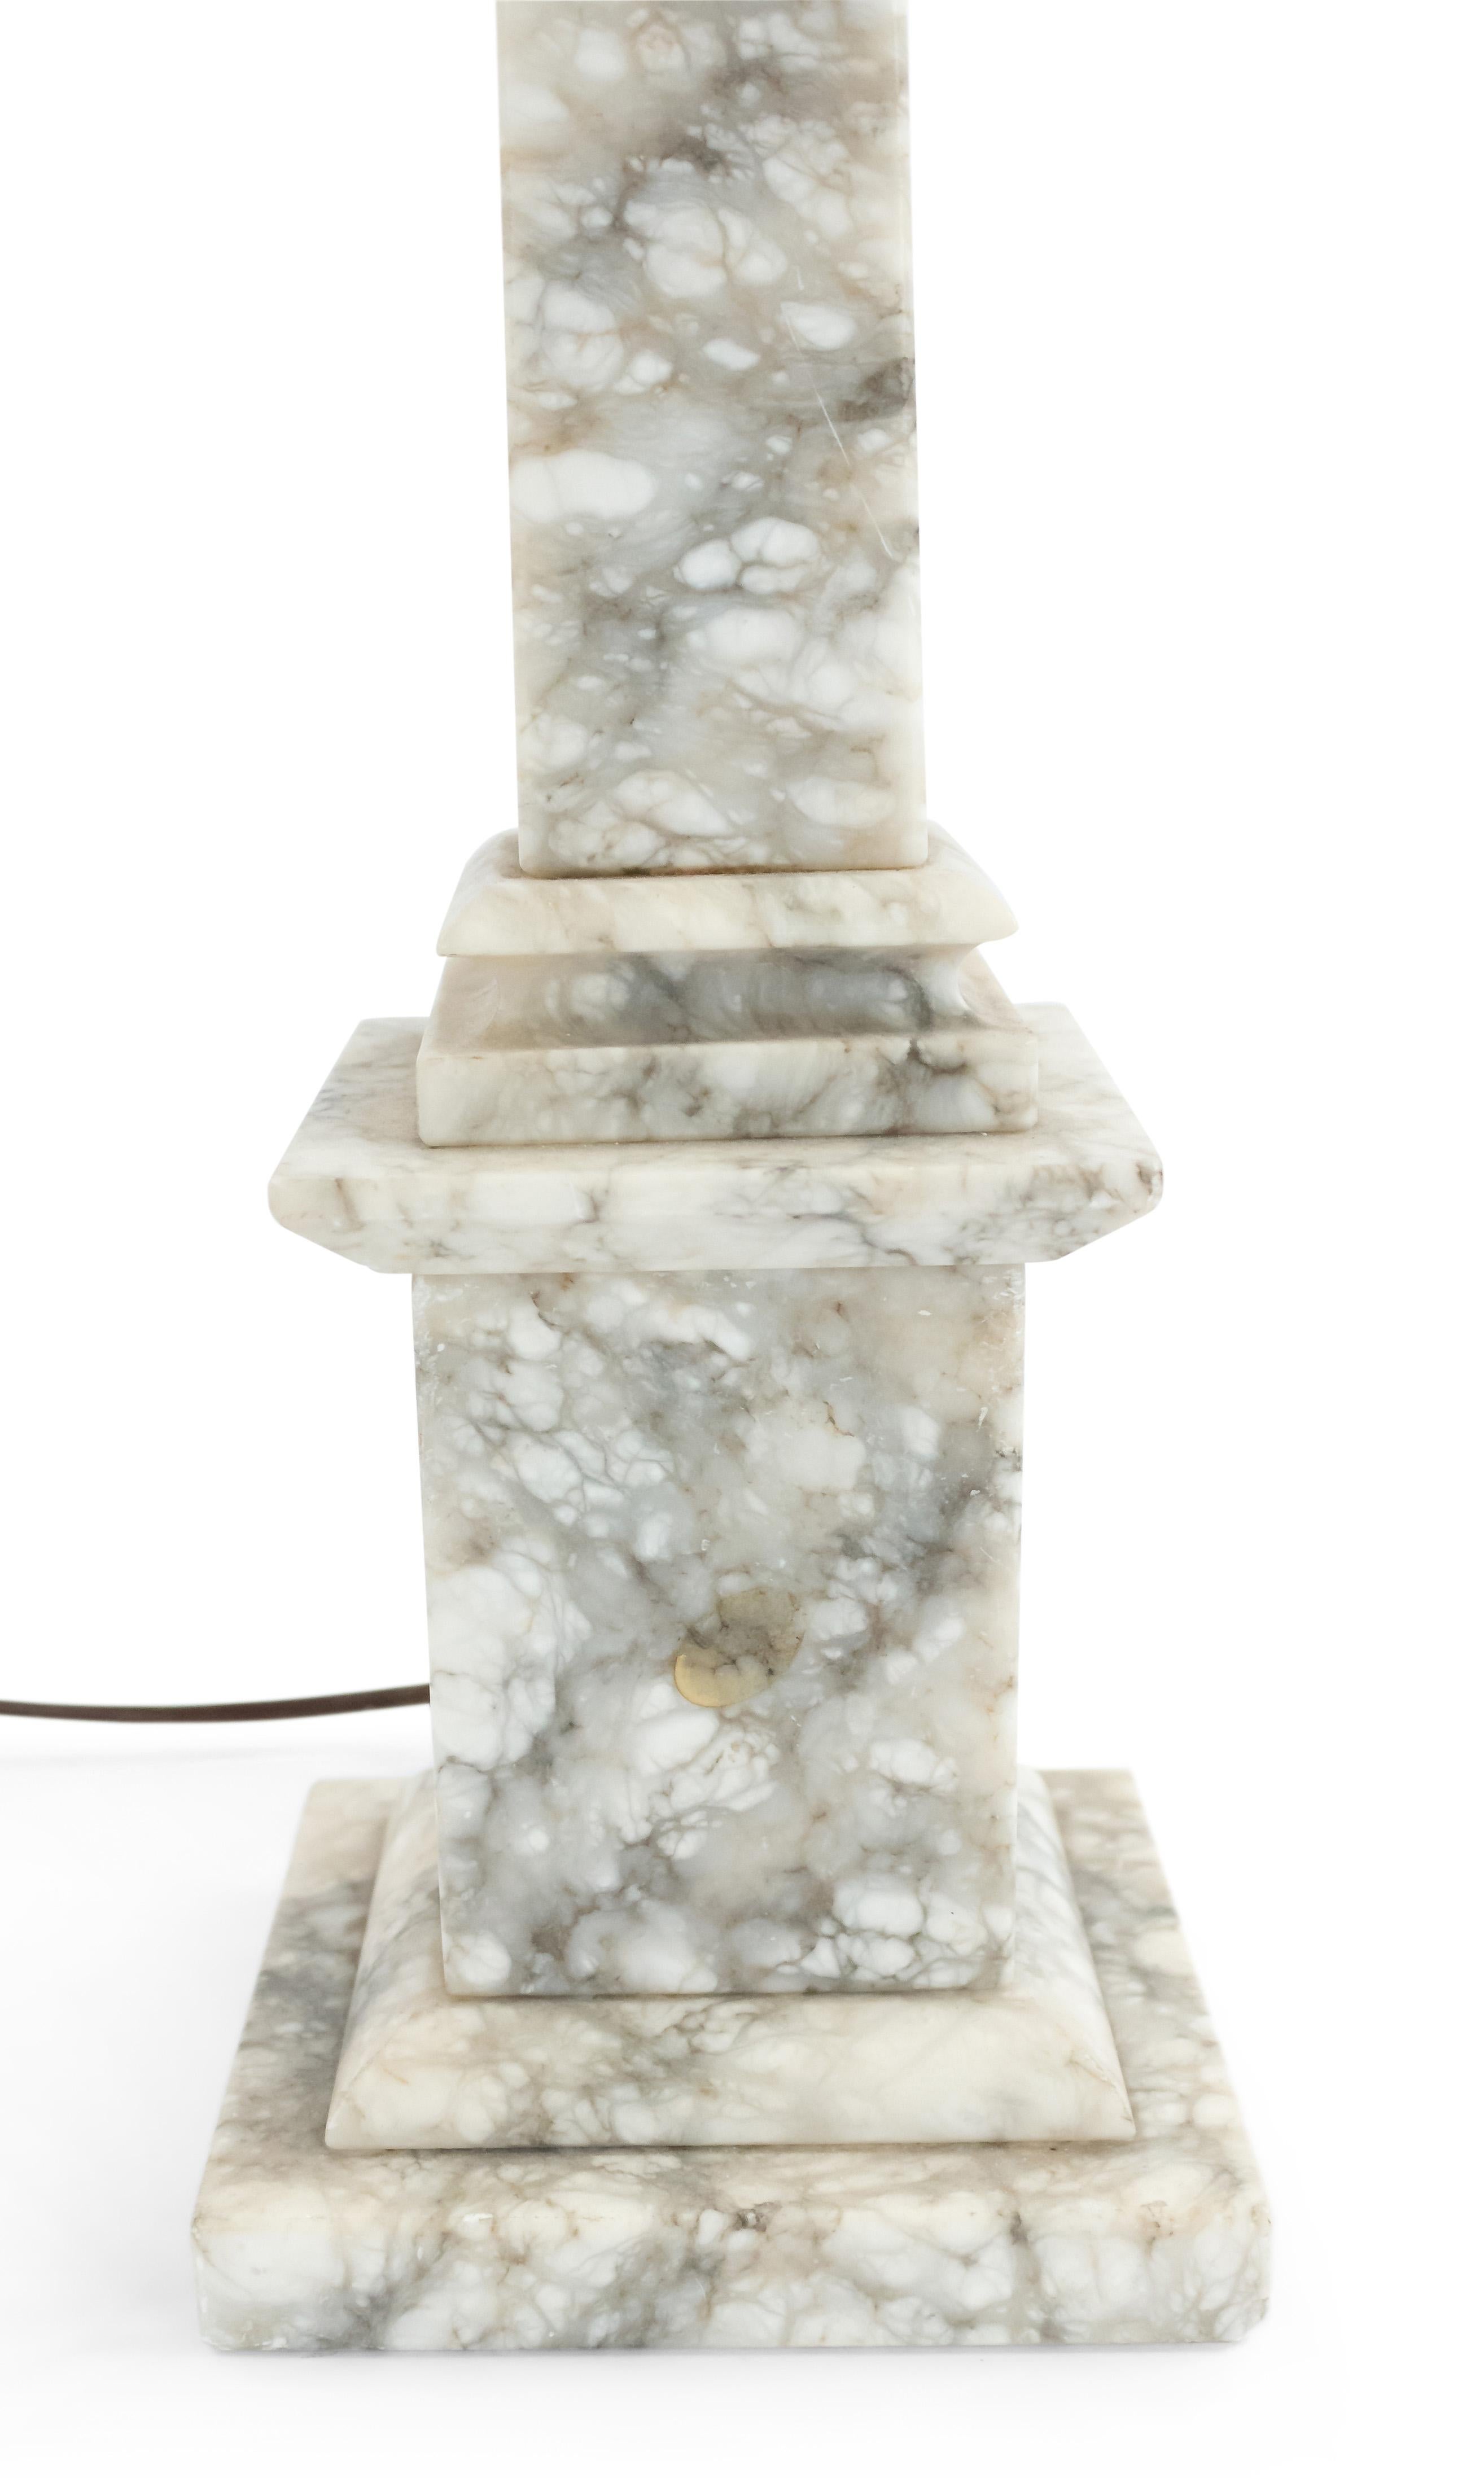 Pair of Italian neoclassic style (19th-20th century) veined white and gray marble table lamps.
 